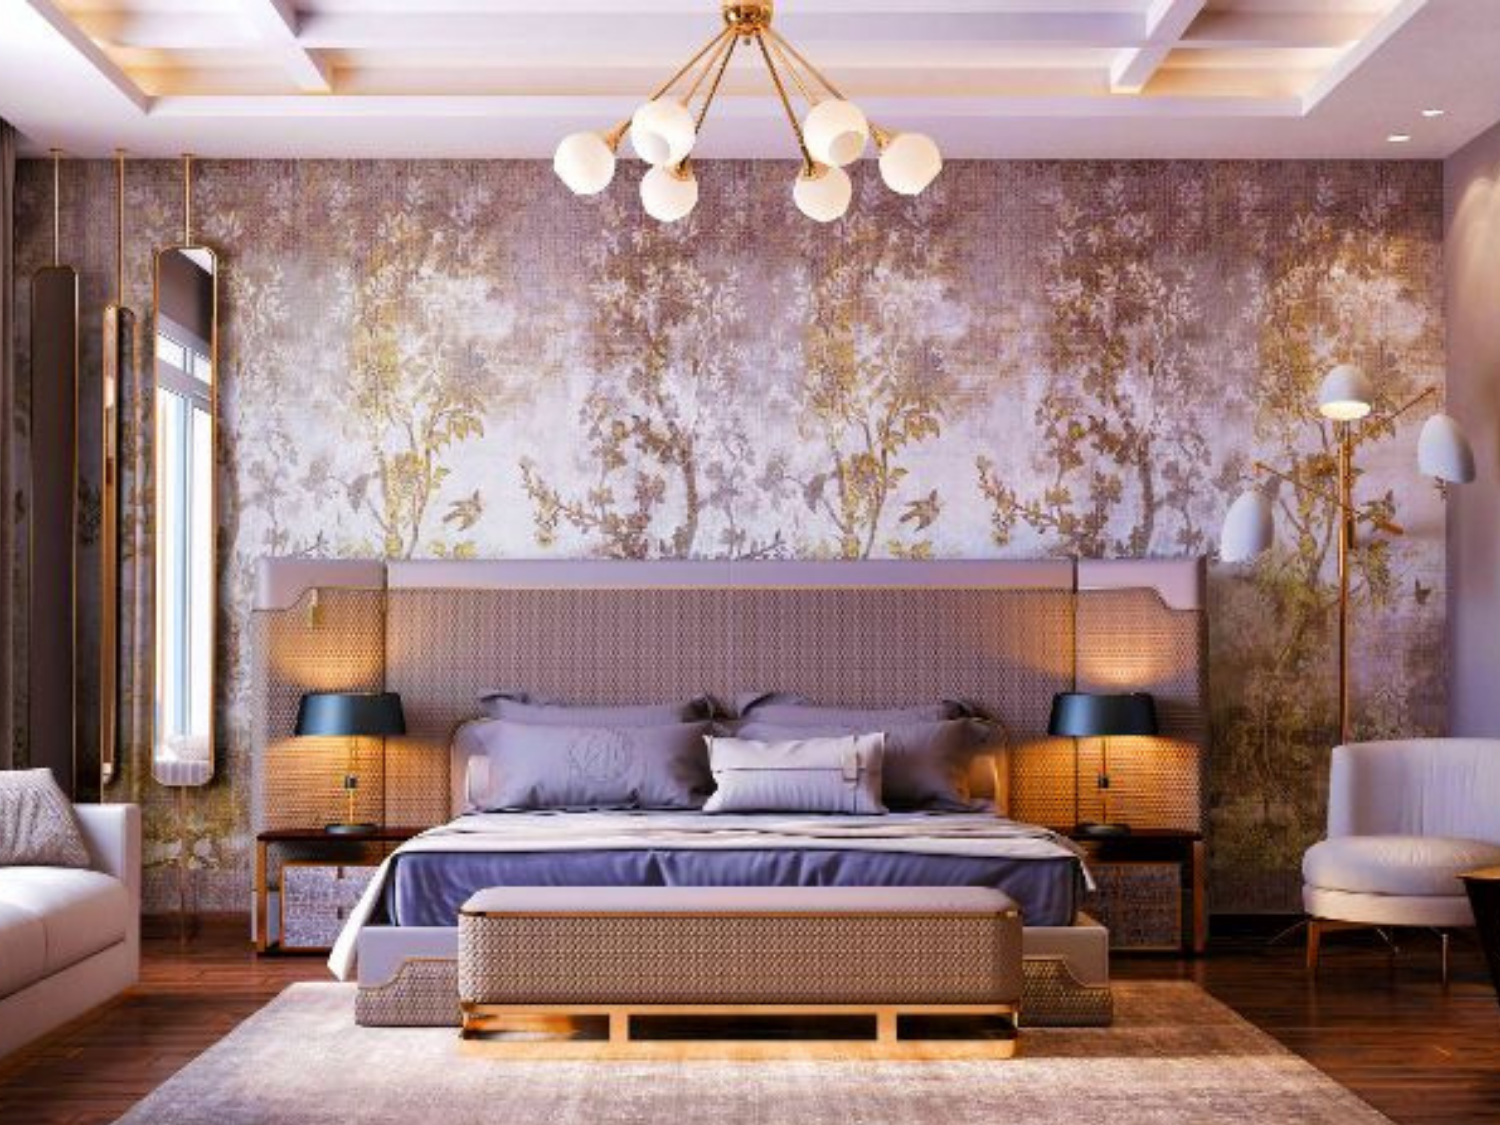 Luxurious bedroom designed by an interior designer with purple wallpaper, sateen sheets and a pendant light